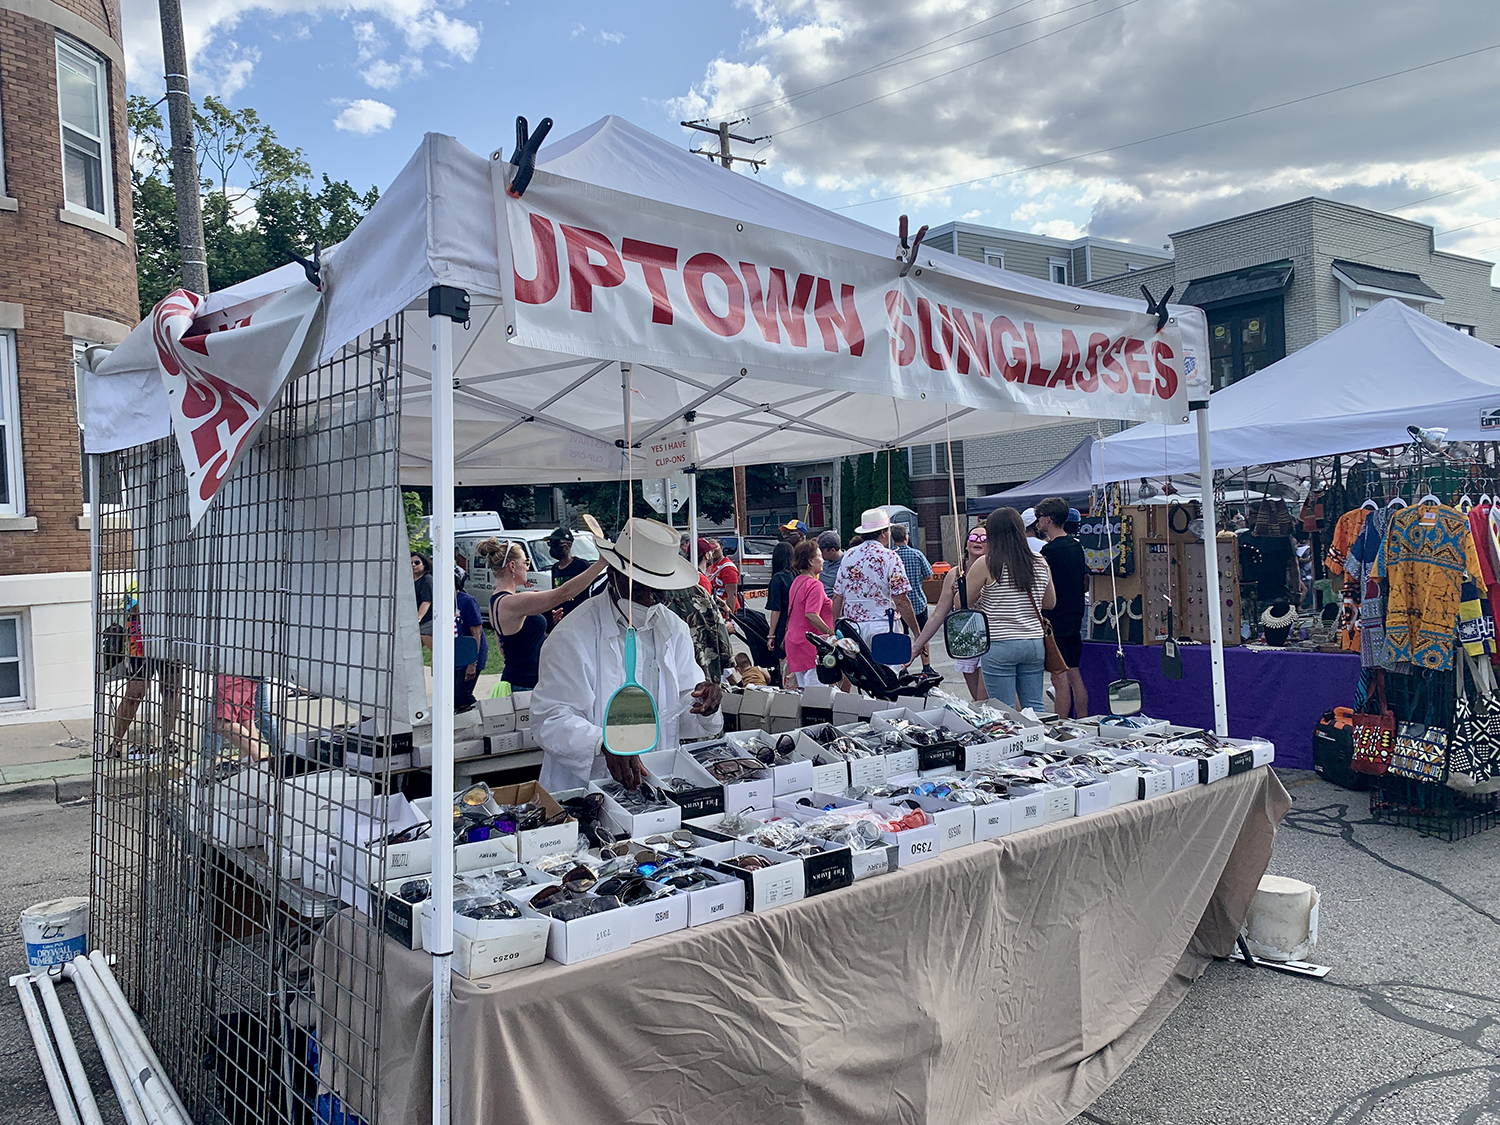 Please enjoy 34 pictures from the 2022 Brady Street Festival